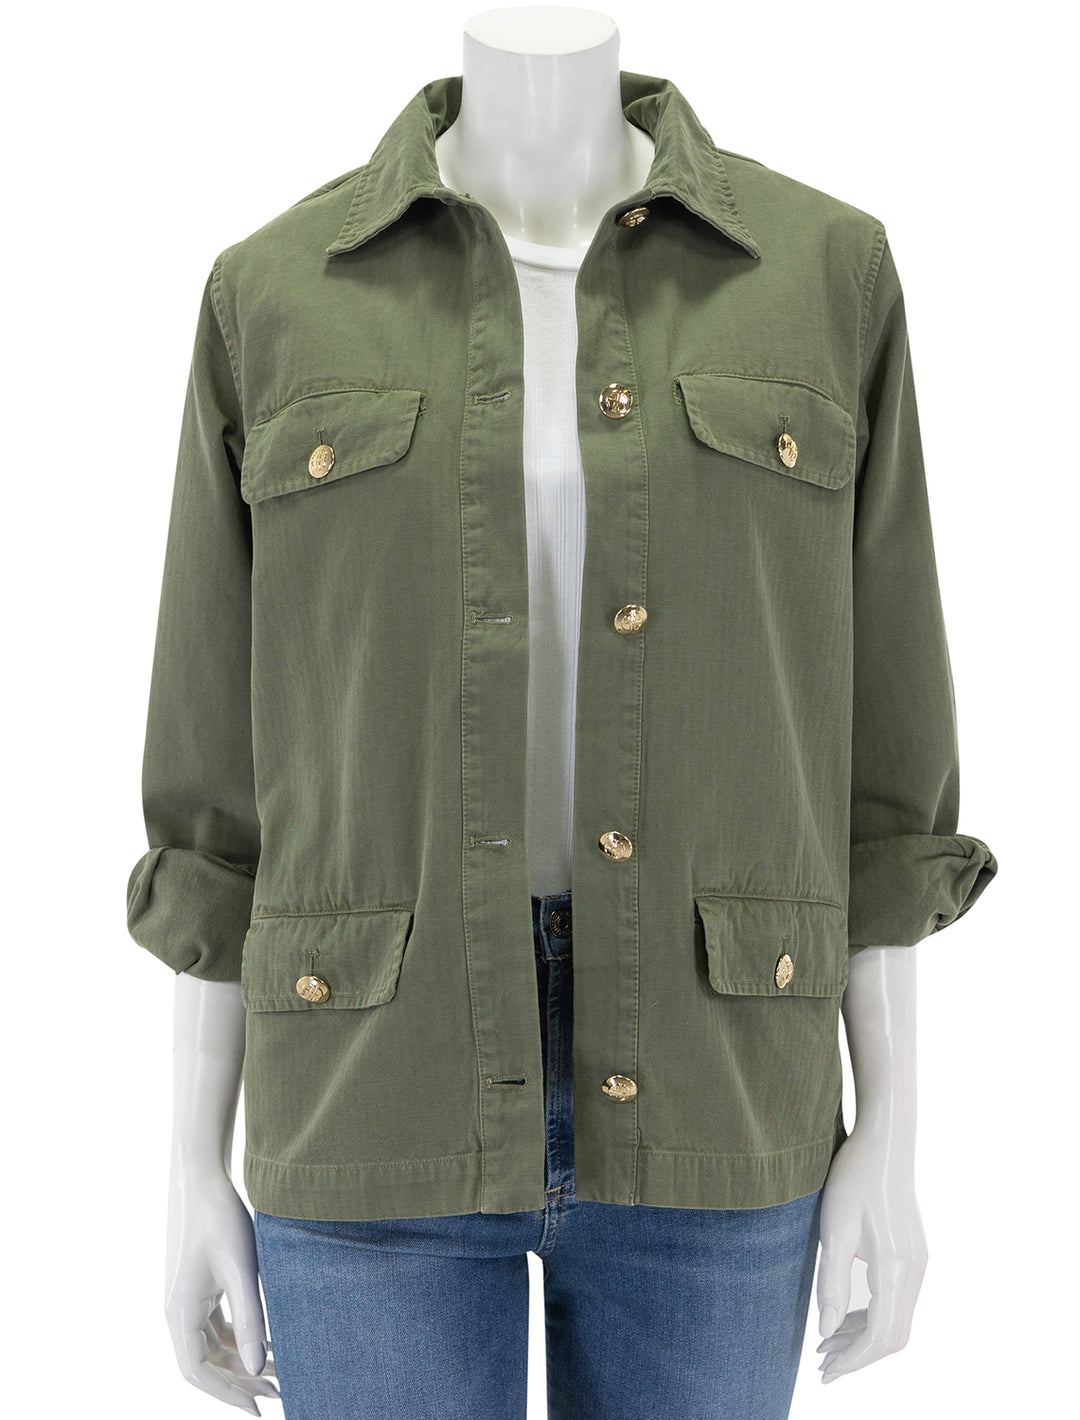 Front view of Anine Bing's corey jacket in army green, unbuttoned.